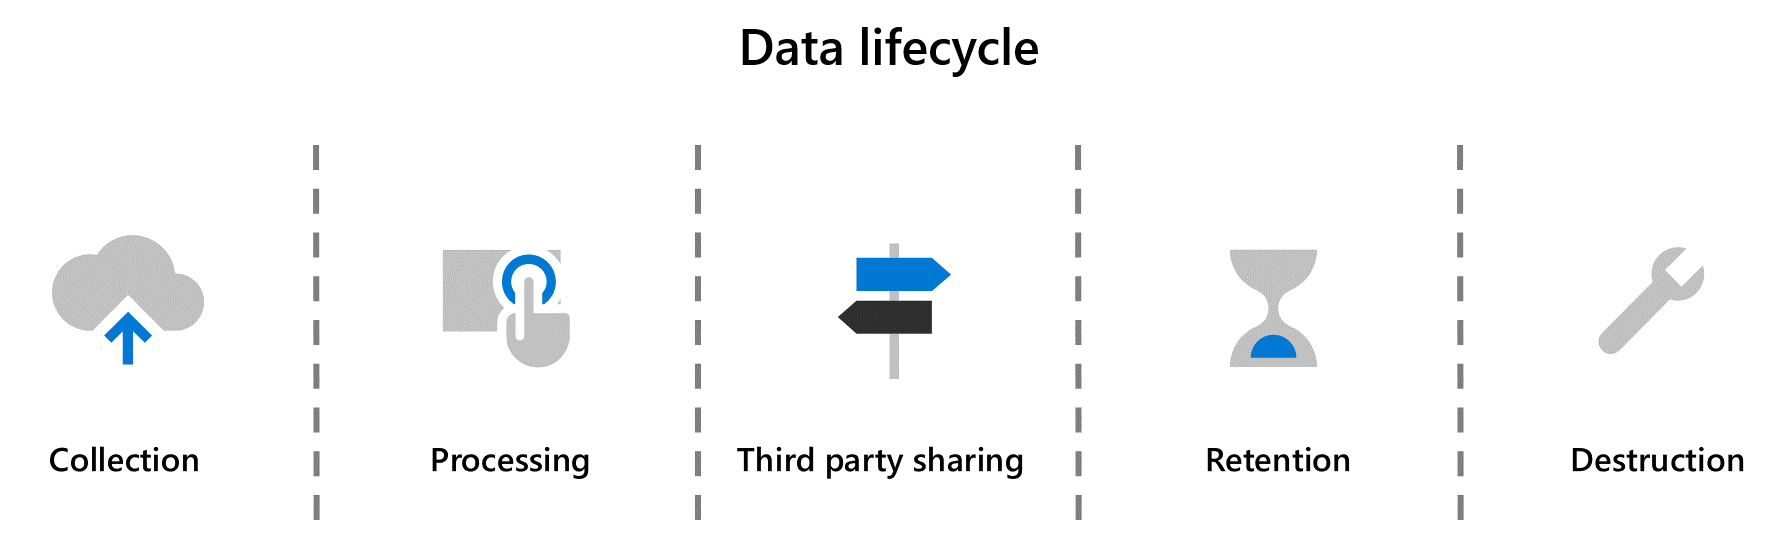 data lifecycle workflow - starting from collection, processing, third party sharing, retention, and destruction.